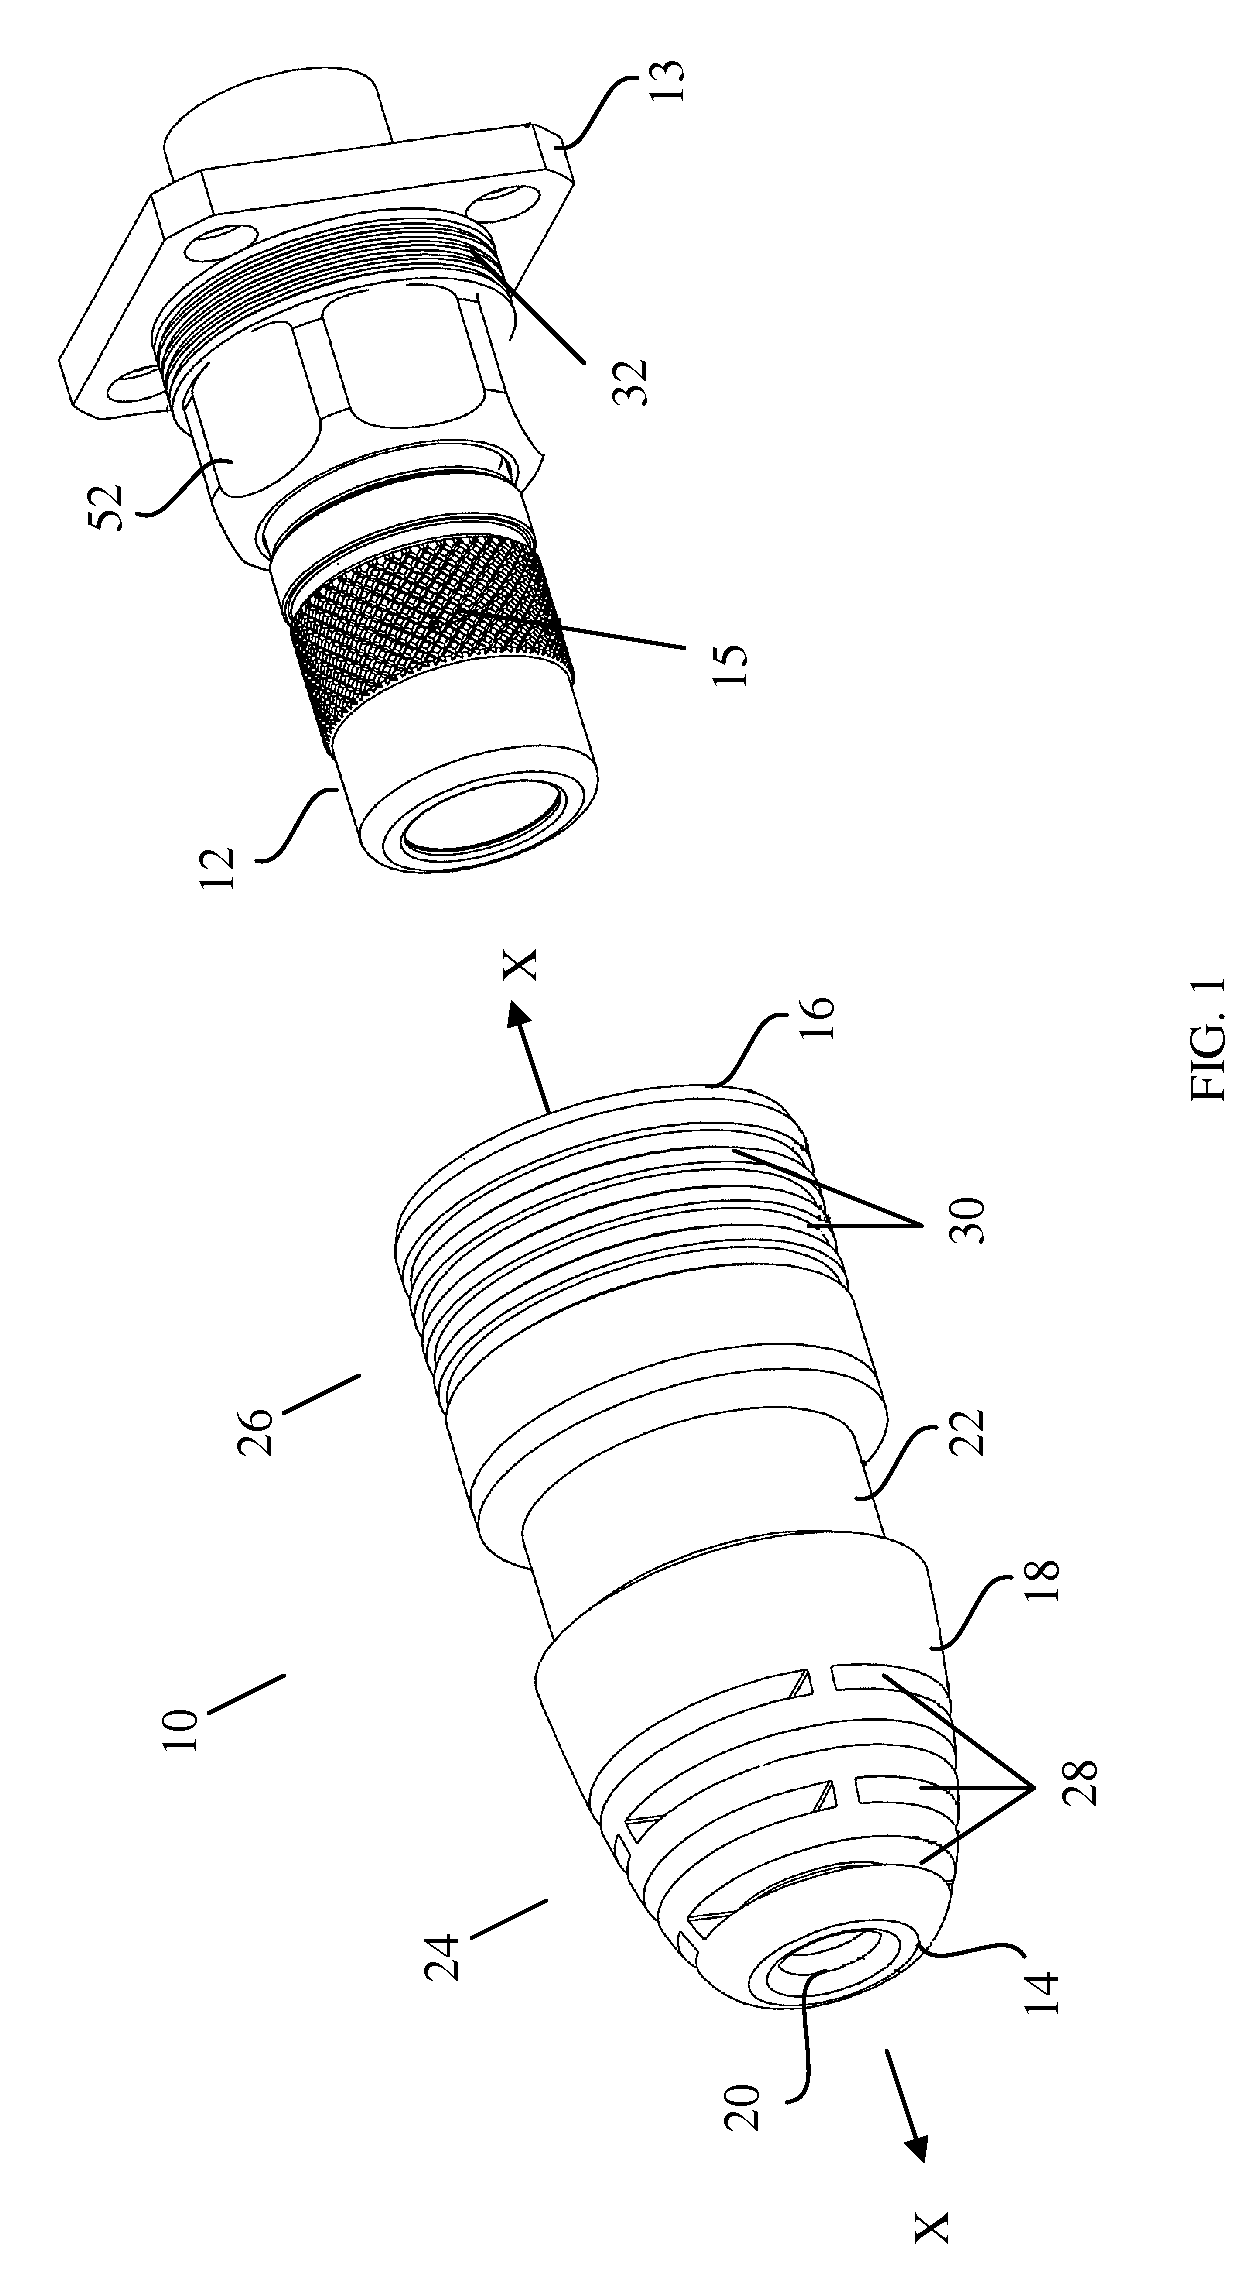 Cover for cable connectors